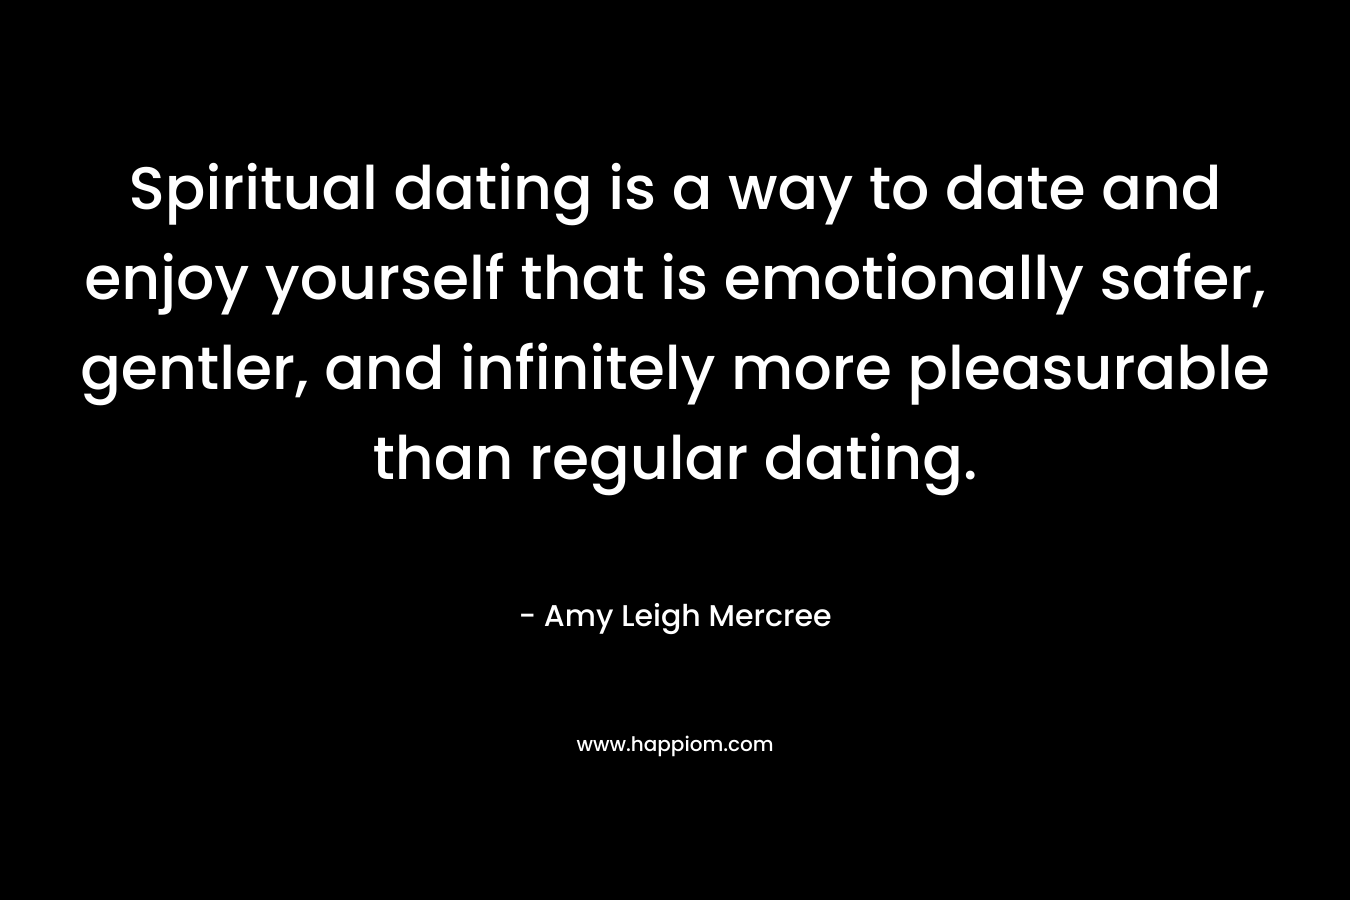 Spiritual dating is a way to date and enjoy yourself that is emotionally safer, gentler, and infinitely more pleasurable than regular dating. – Amy Leigh Mercree